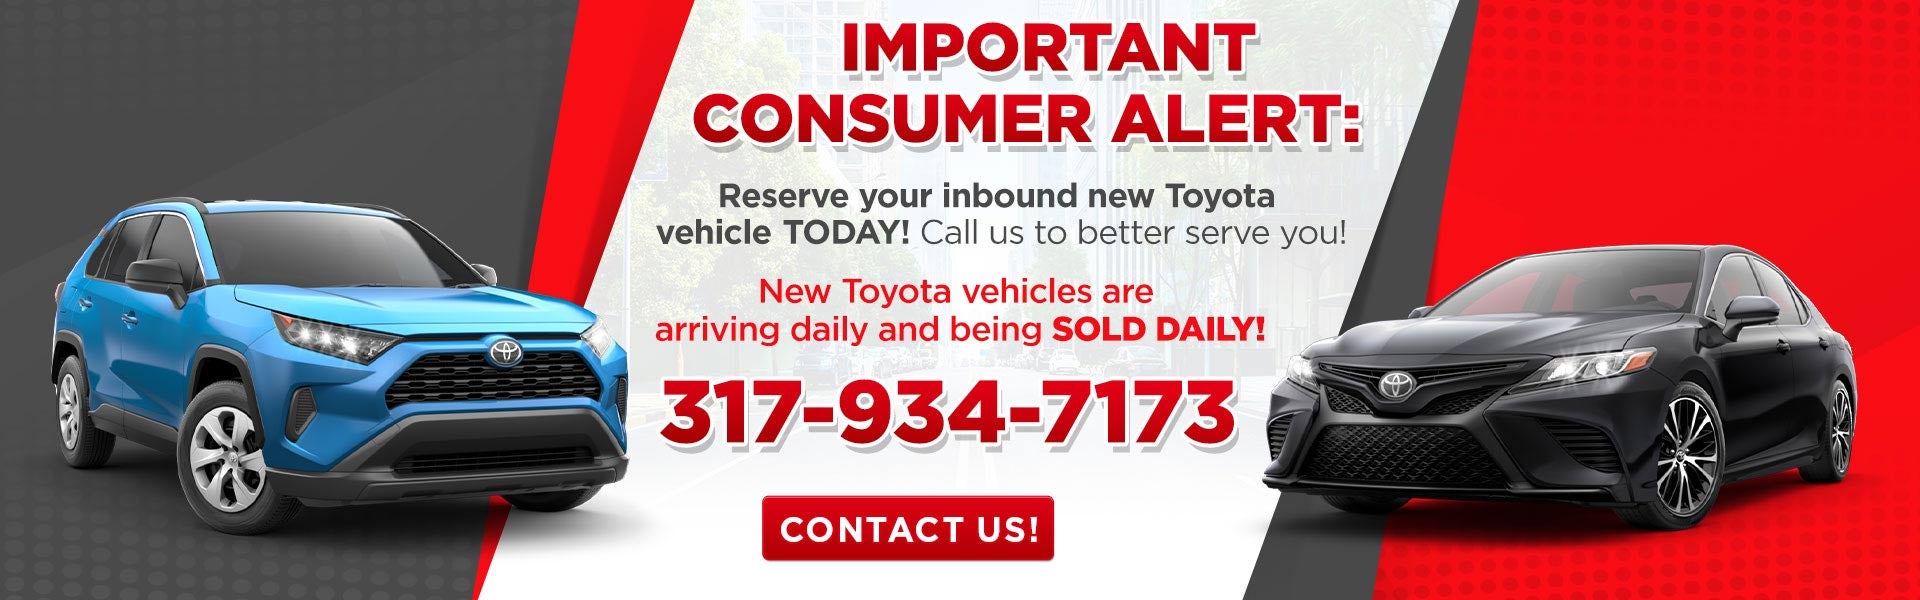 New Toyotas Arriving Daily